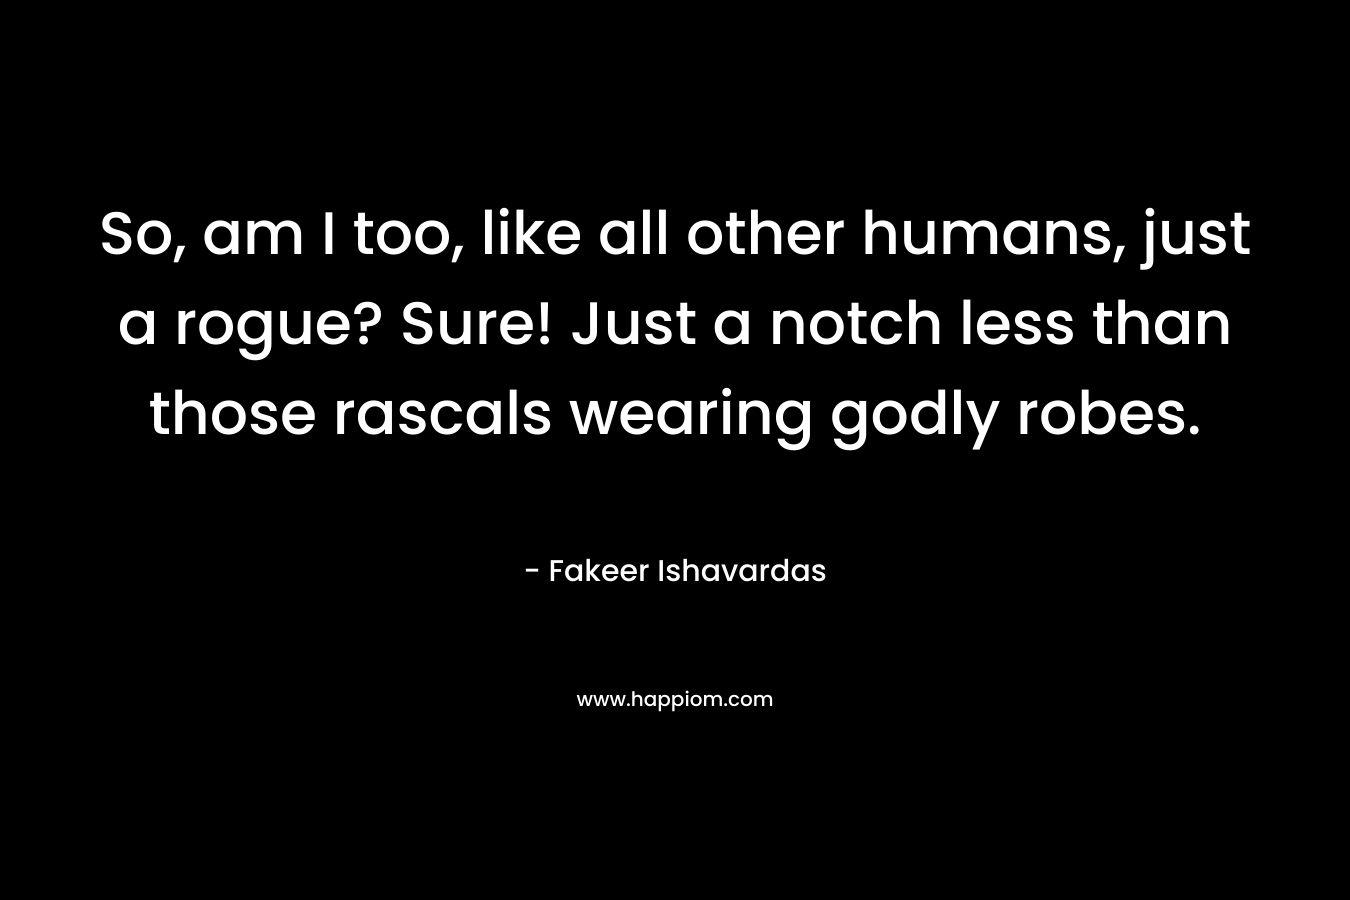 So, am I too, like all other humans, just a rogue? Sure! Just a notch less than those rascals wearing godly robes. – Fakeer Ishavardas